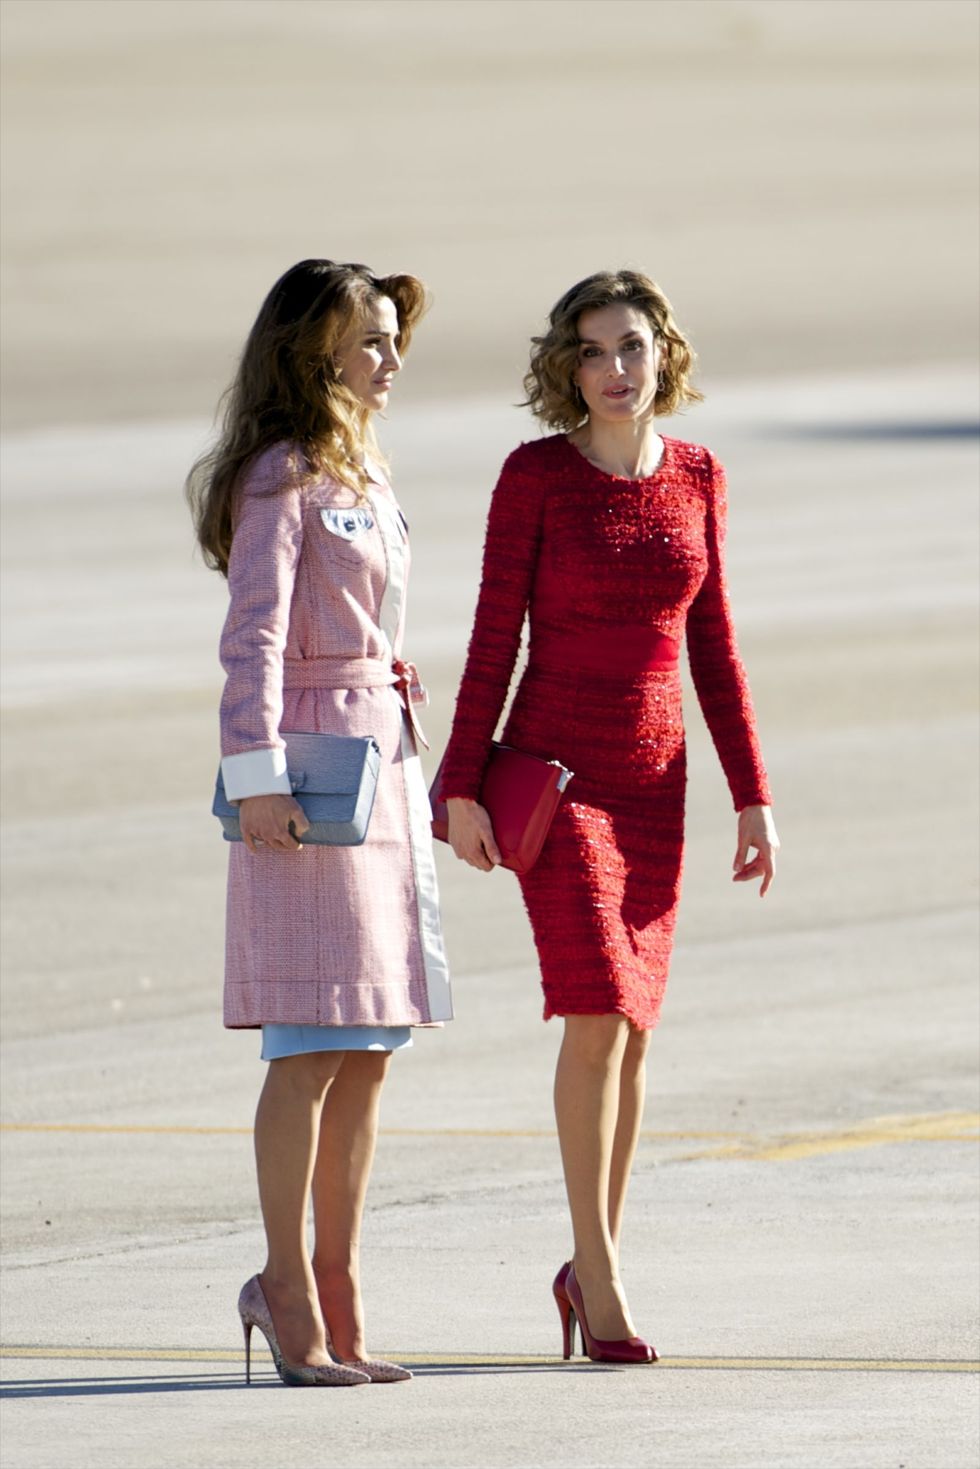 <p>Queen Rania, as she's often called informally, is the Queen consort of Jordan. Kuwati-born to Palestinian parents, she studied at the American University in Cairo. <span class="redactor-invisible-space" data-verified="redactor" data-redactor-tag="span" data-redactor-class="redactor-invisible-space"></span></p>